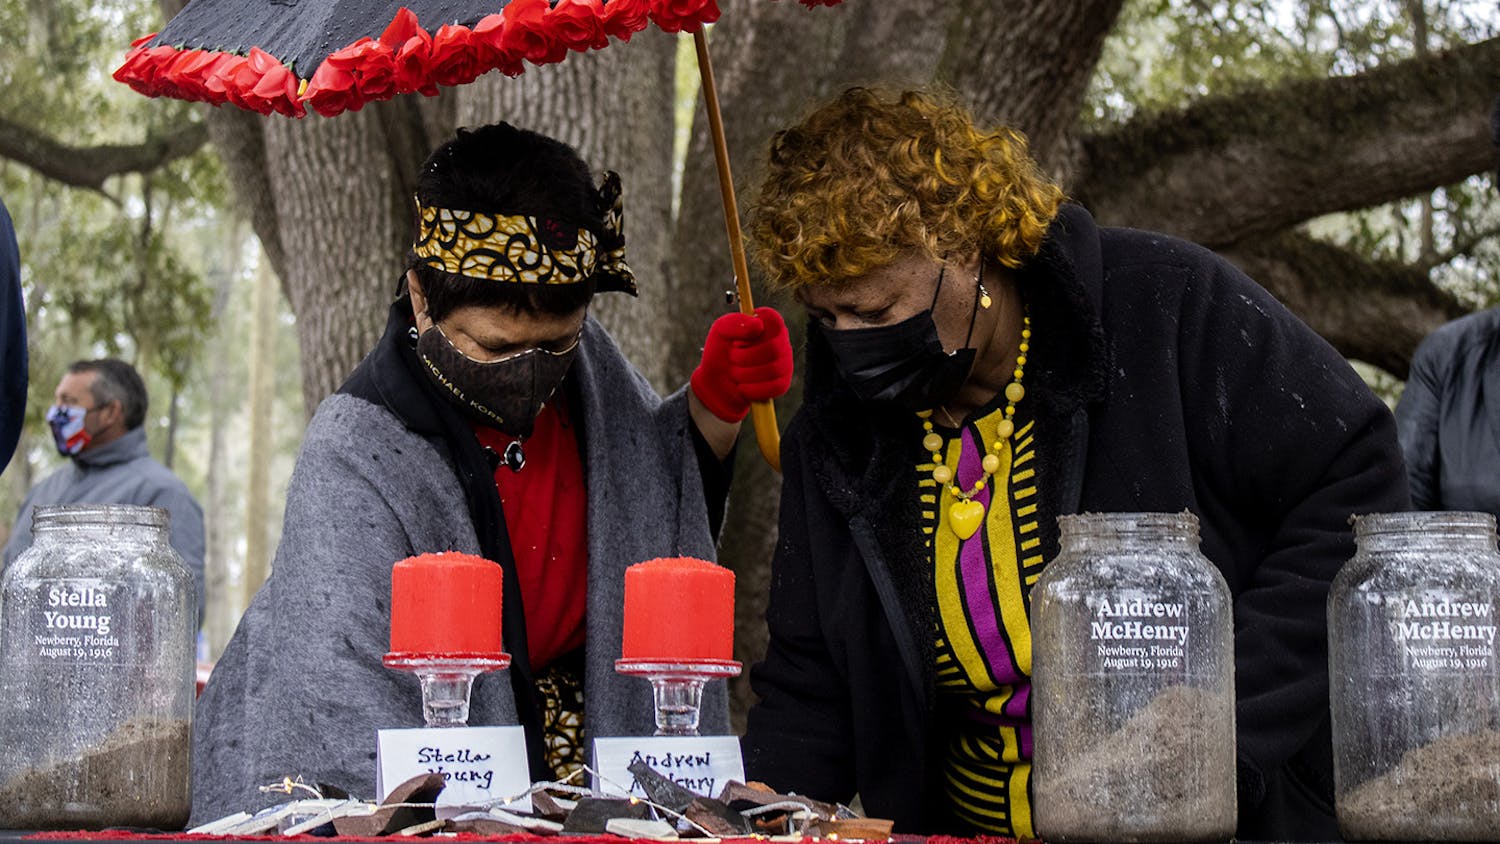 Gail K. Watson (left) and Brenda Whitfield (right) scoop dirt into glass jars at the soil ceremony for the Newberry Six on Friday, Feb. 5, 2021. Whitfield spoke during the ceremony before the crowd began adding earth to the containers.